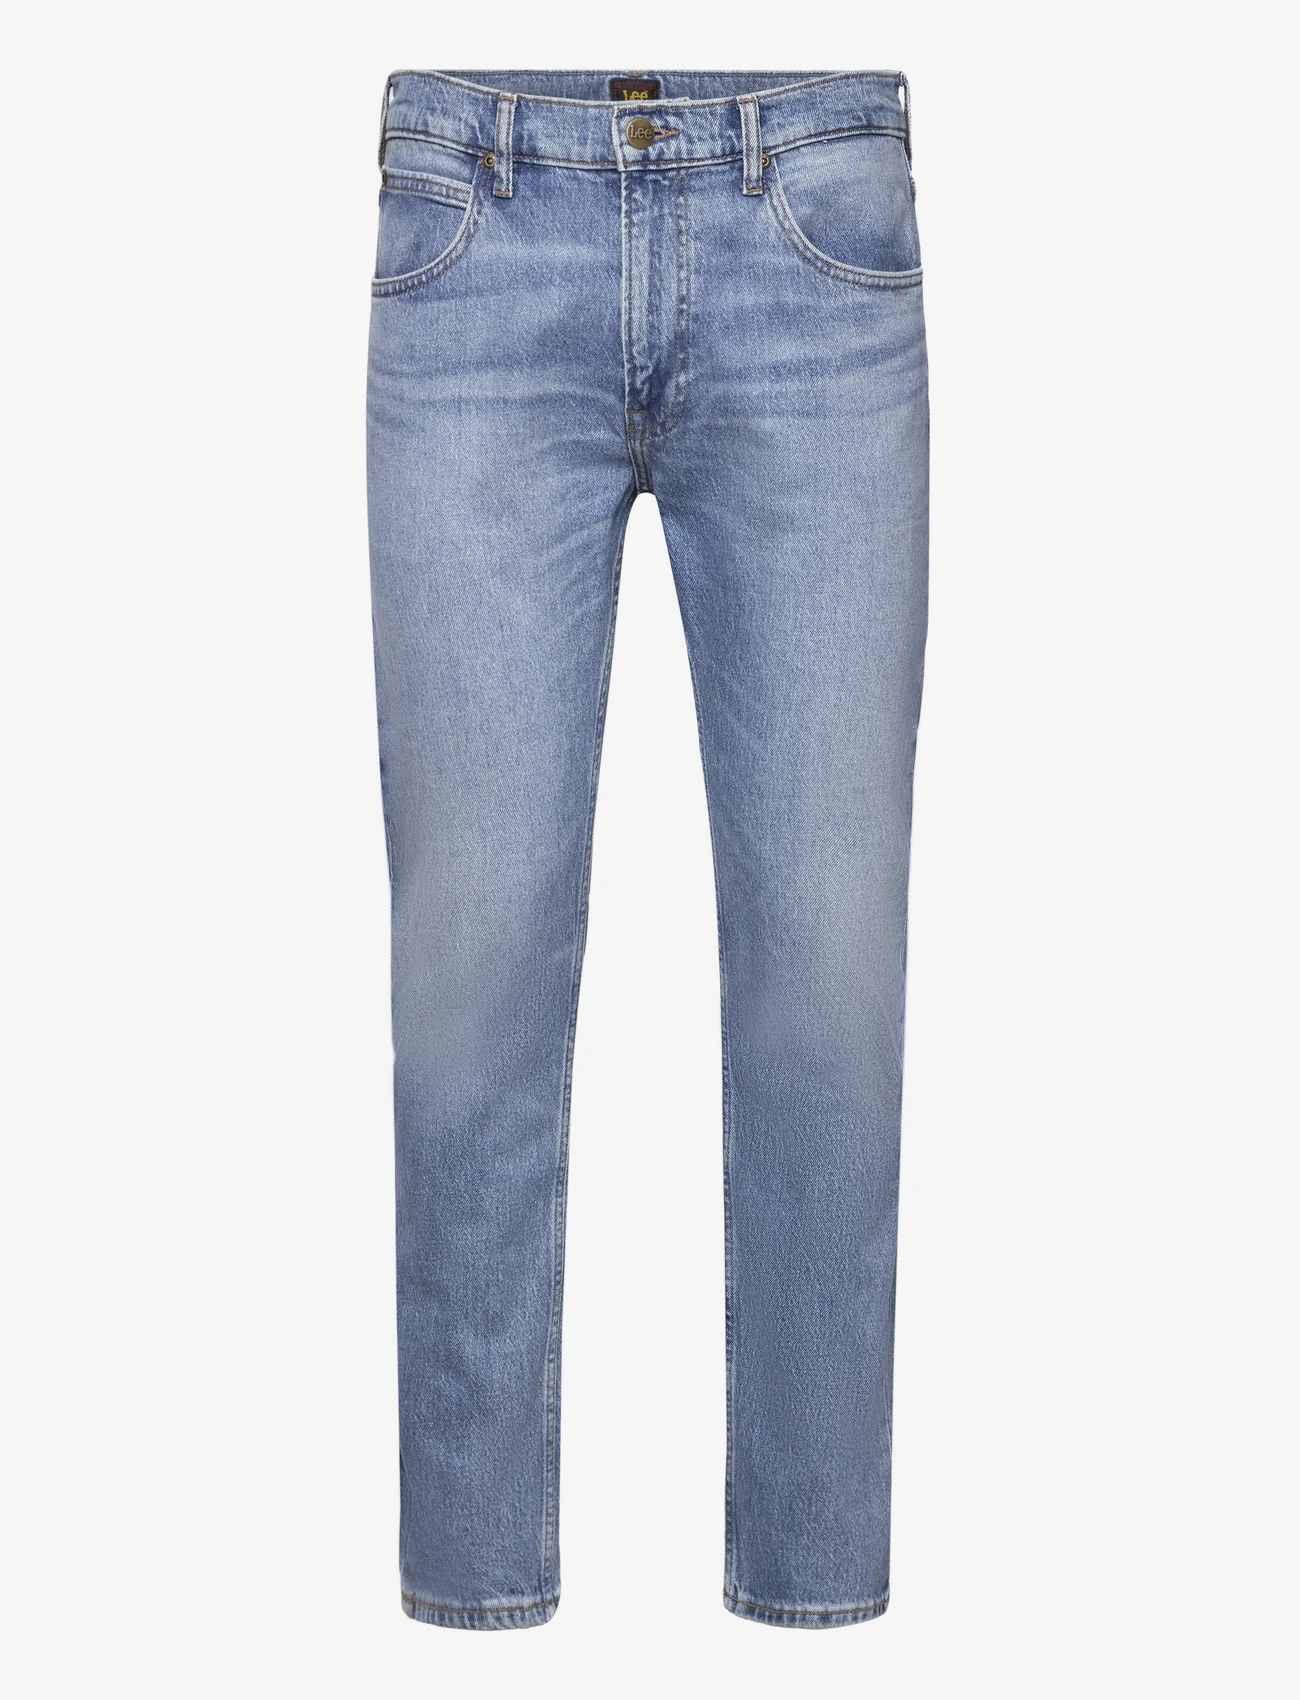 Lee Jeans - RIDER - slim jeans - downtown - 0